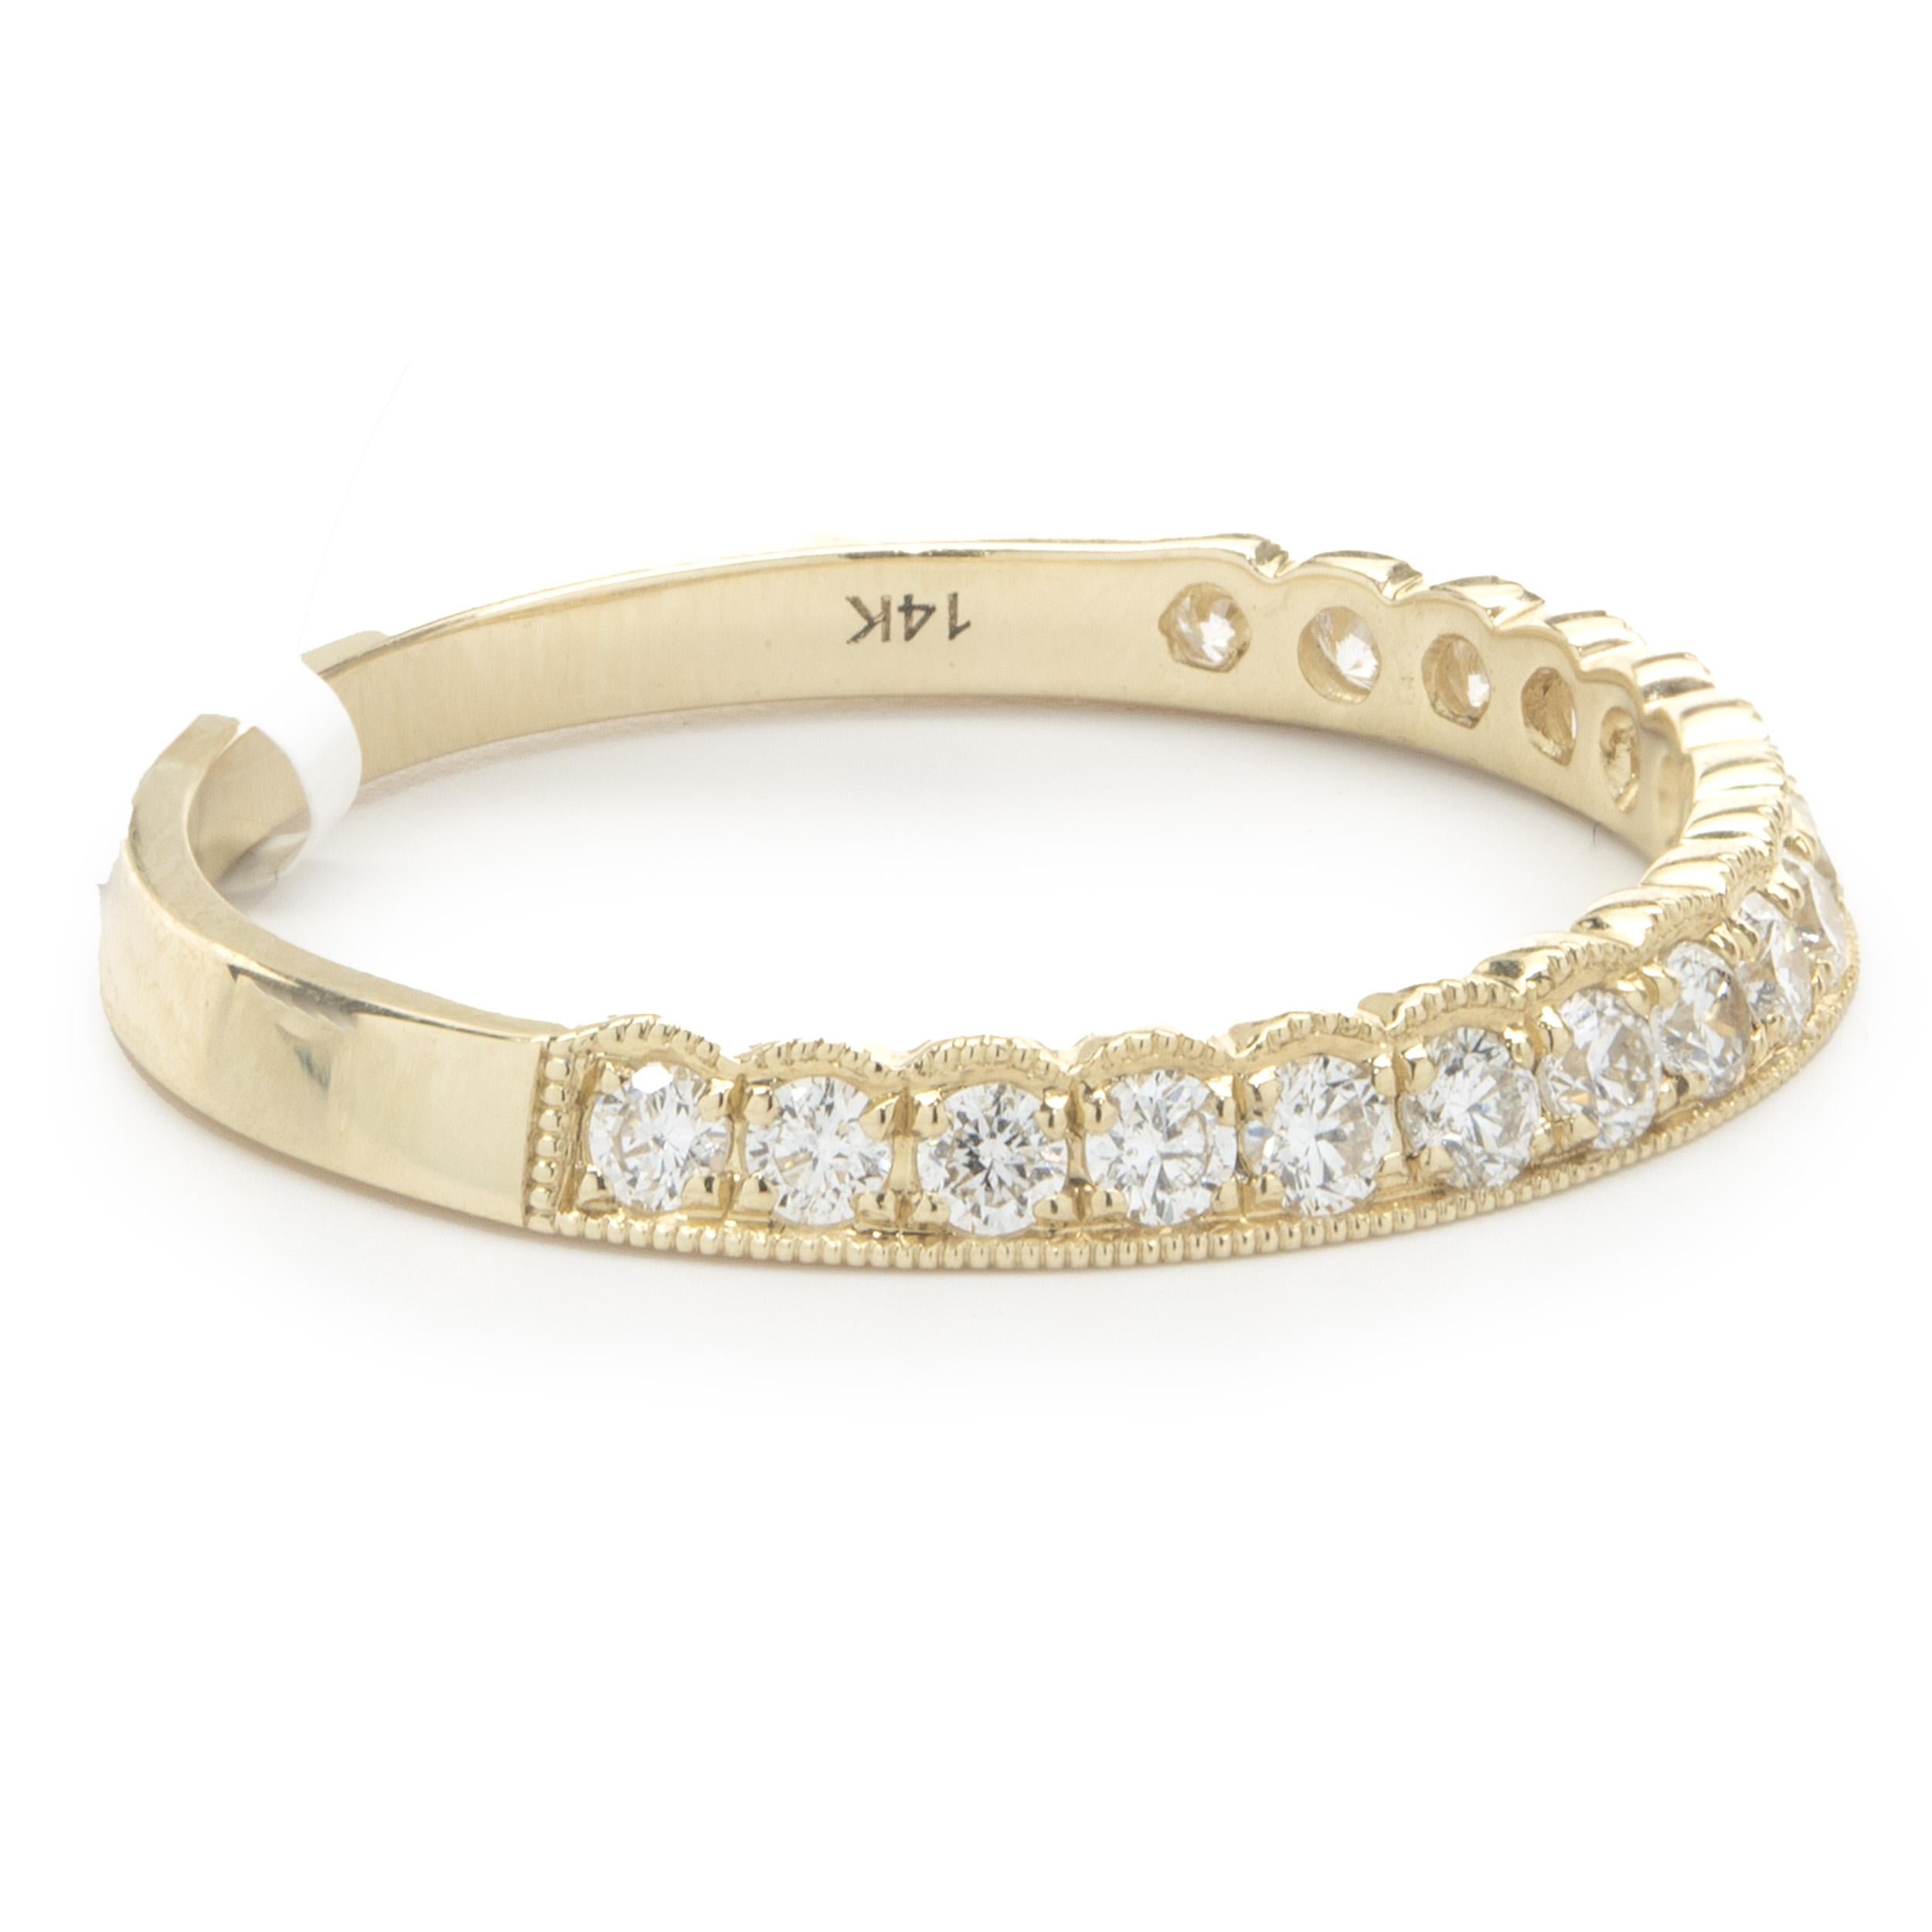 Designer: Custom
Material: 14K yellow gold
Diamond: 17 round brilliant cut = 0.38cttw
Color: G
Clarity: SI1
Size: 6.5 (complimentary sizing available upon request)
Weight: 1.51 grams